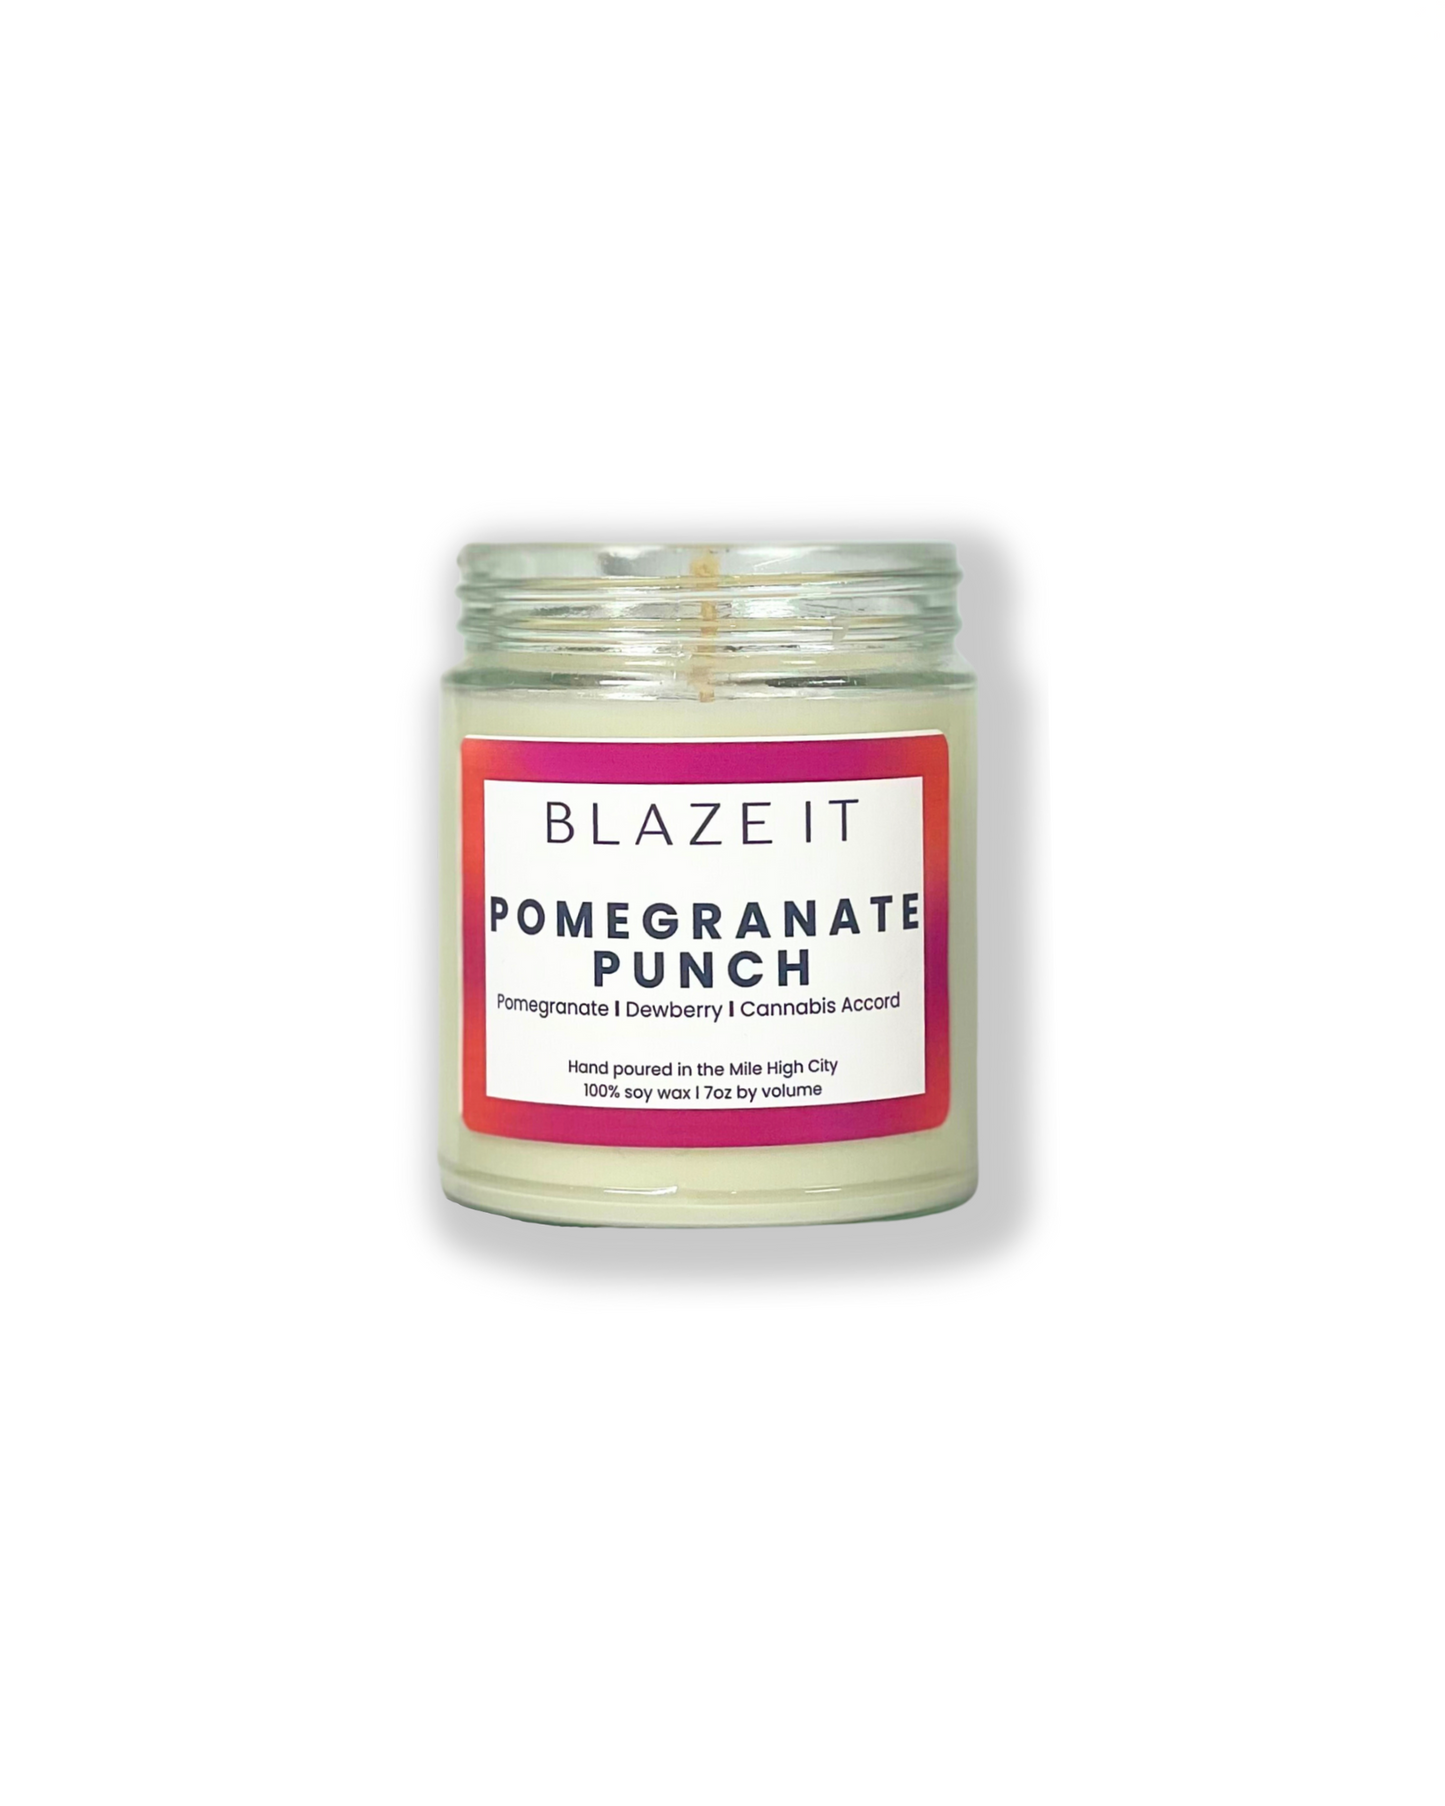 Pomegranate Punch soy candle - Blaze It Candle Co